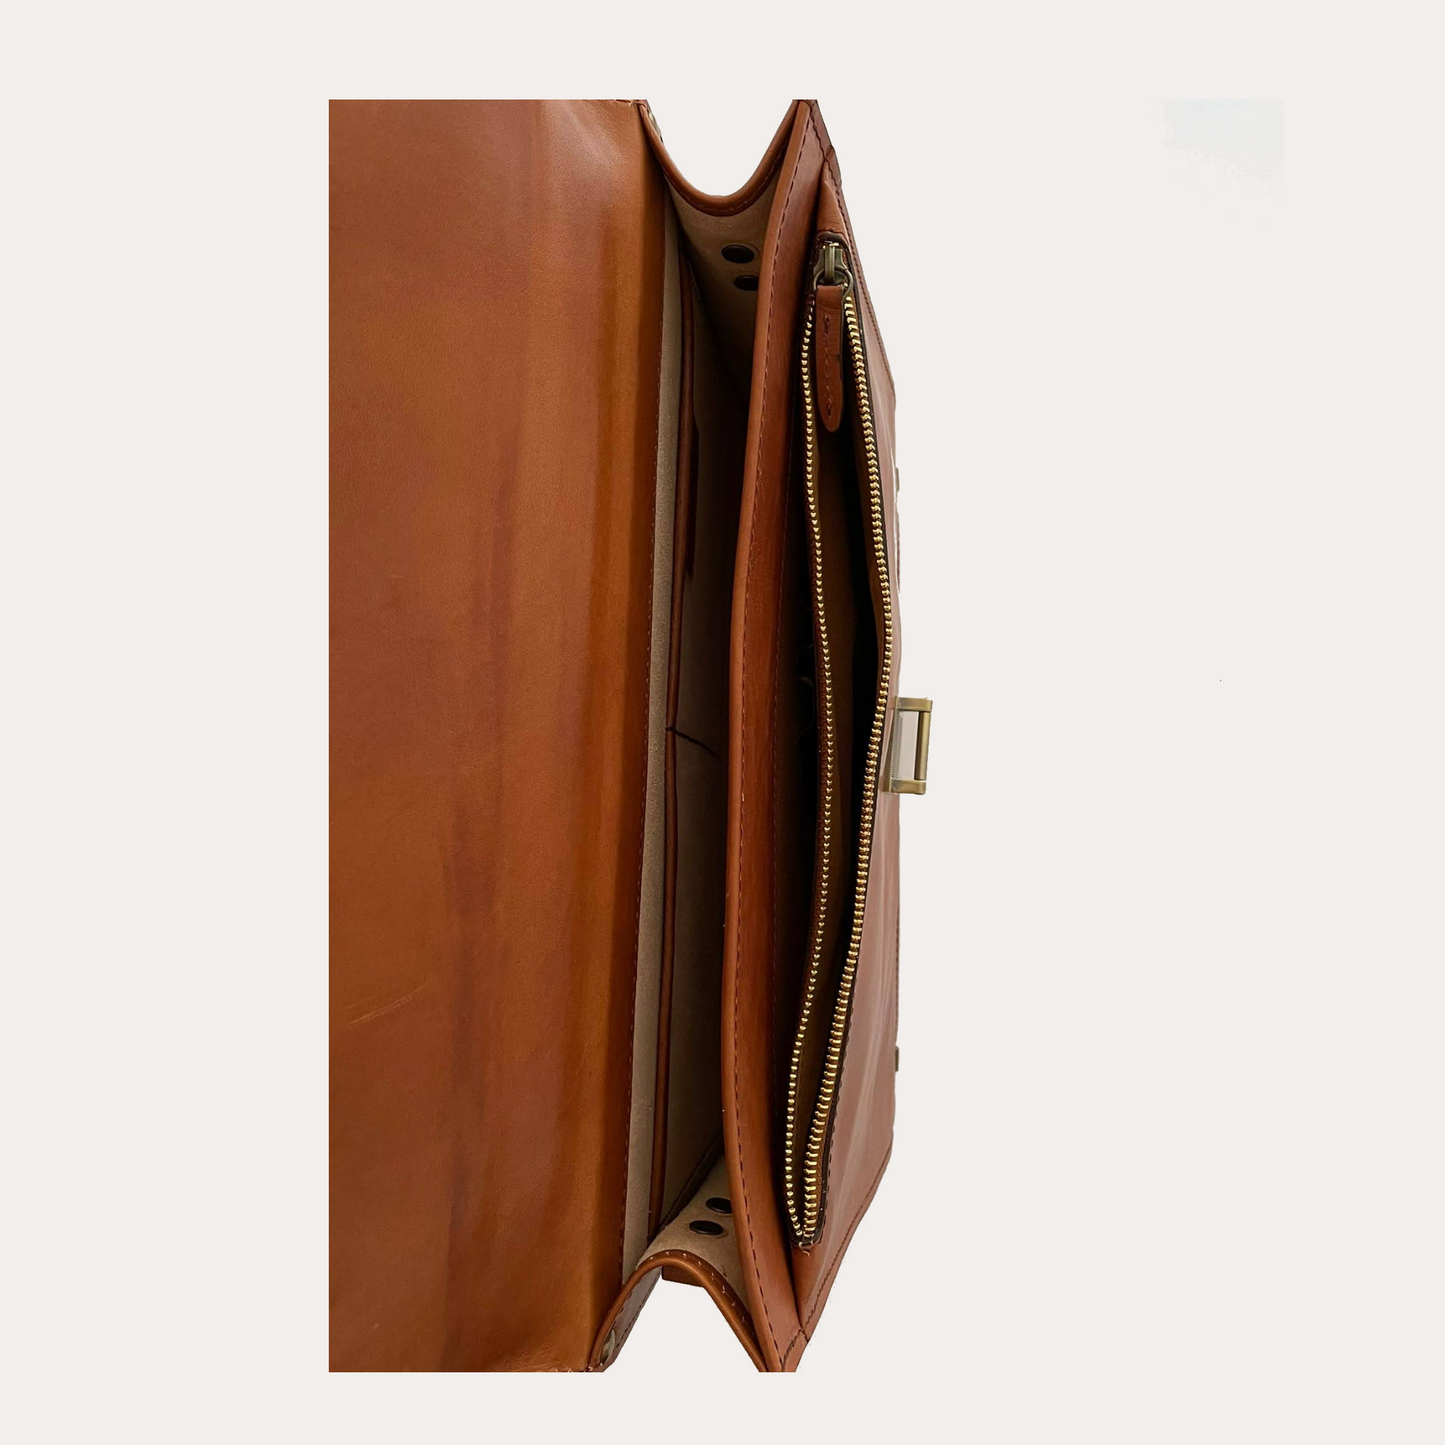 Cognac Vegetable Tanned Leather Briefcase